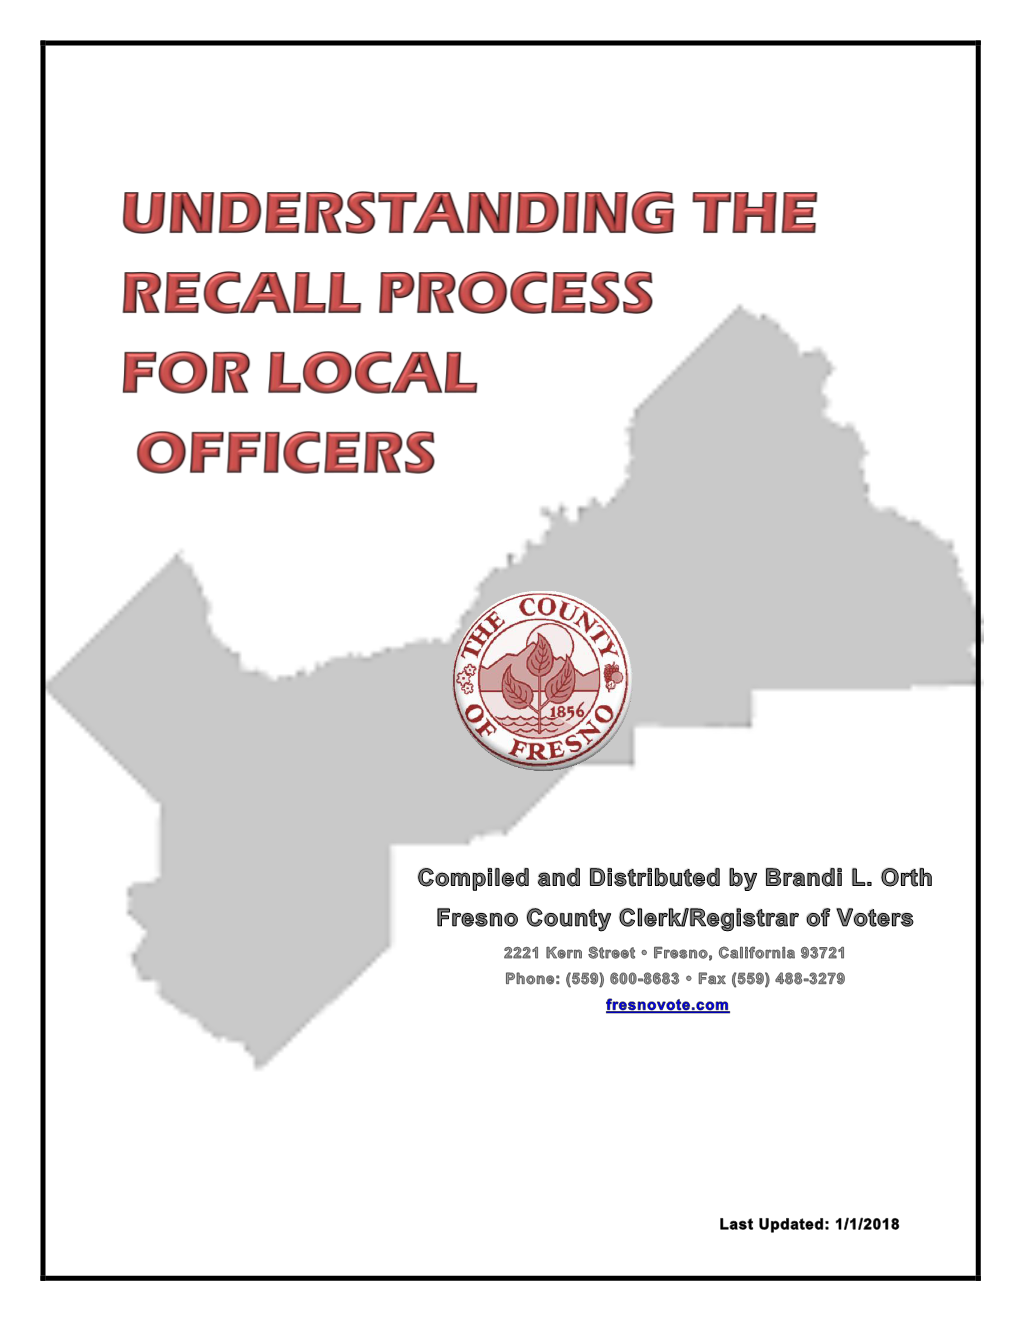 UNDERSTANDING the RECALL PROCESS for LOCAL OFFICERS, Is Intended to Provide General Information and Does Not Have the Force and Effect of Law, Regulation Or Rule